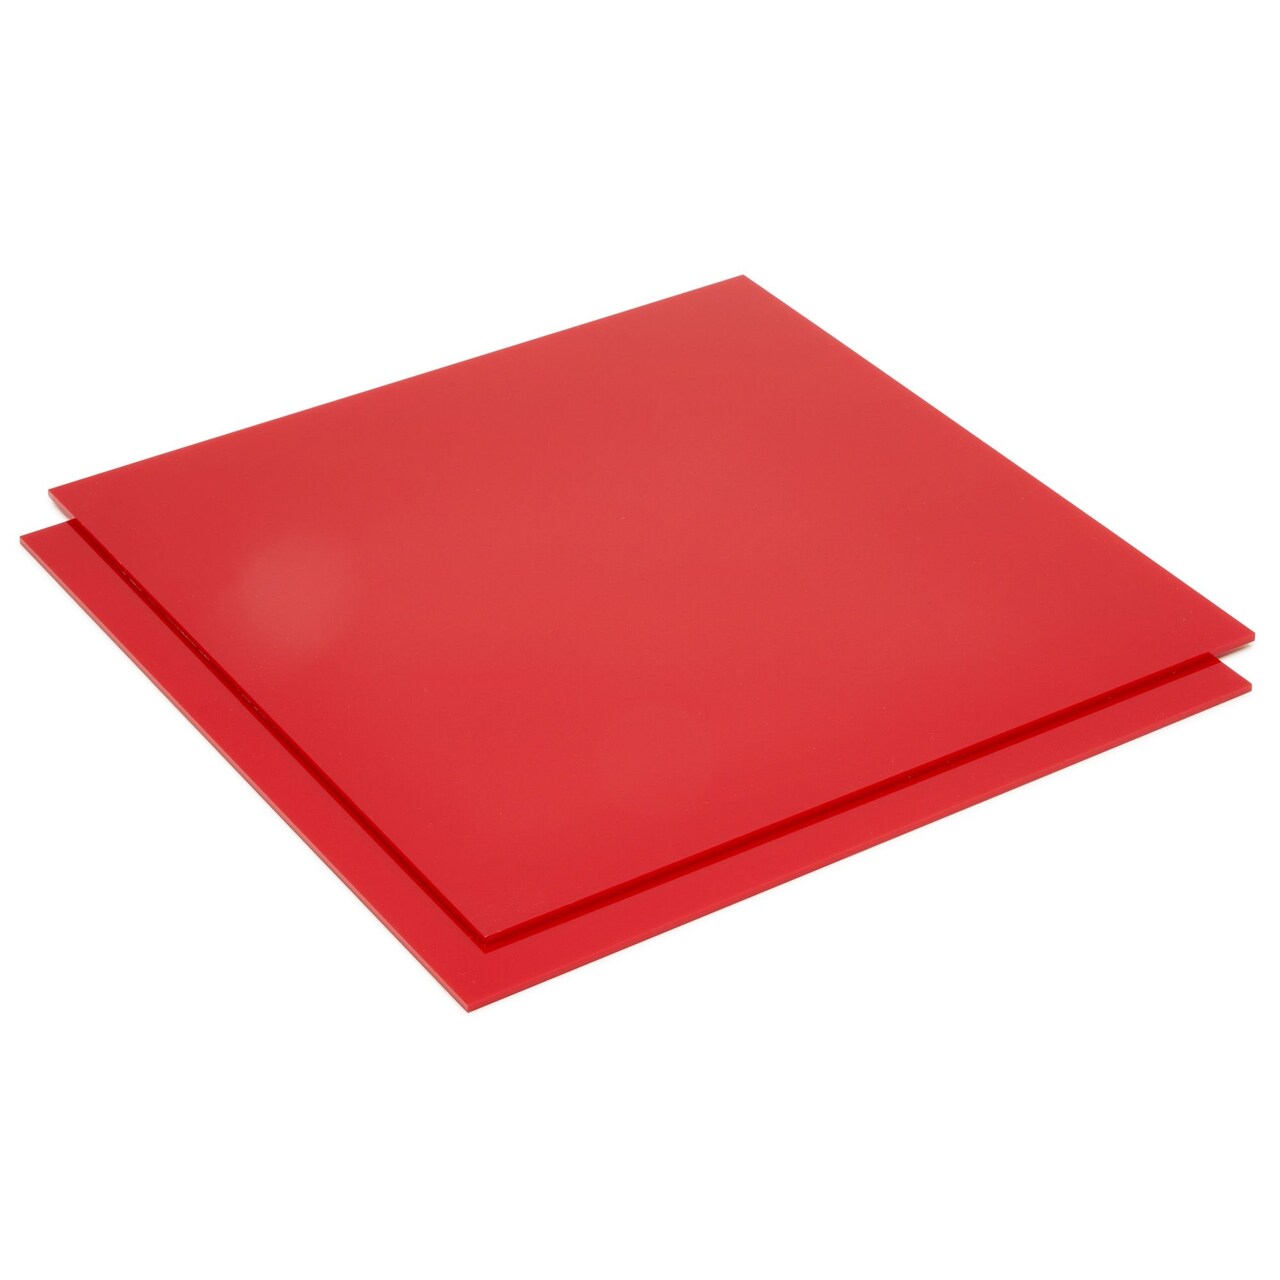 Red Acrylic Square Blanks for Crafts, 1/8 Inch Thick (3mm, 12x12